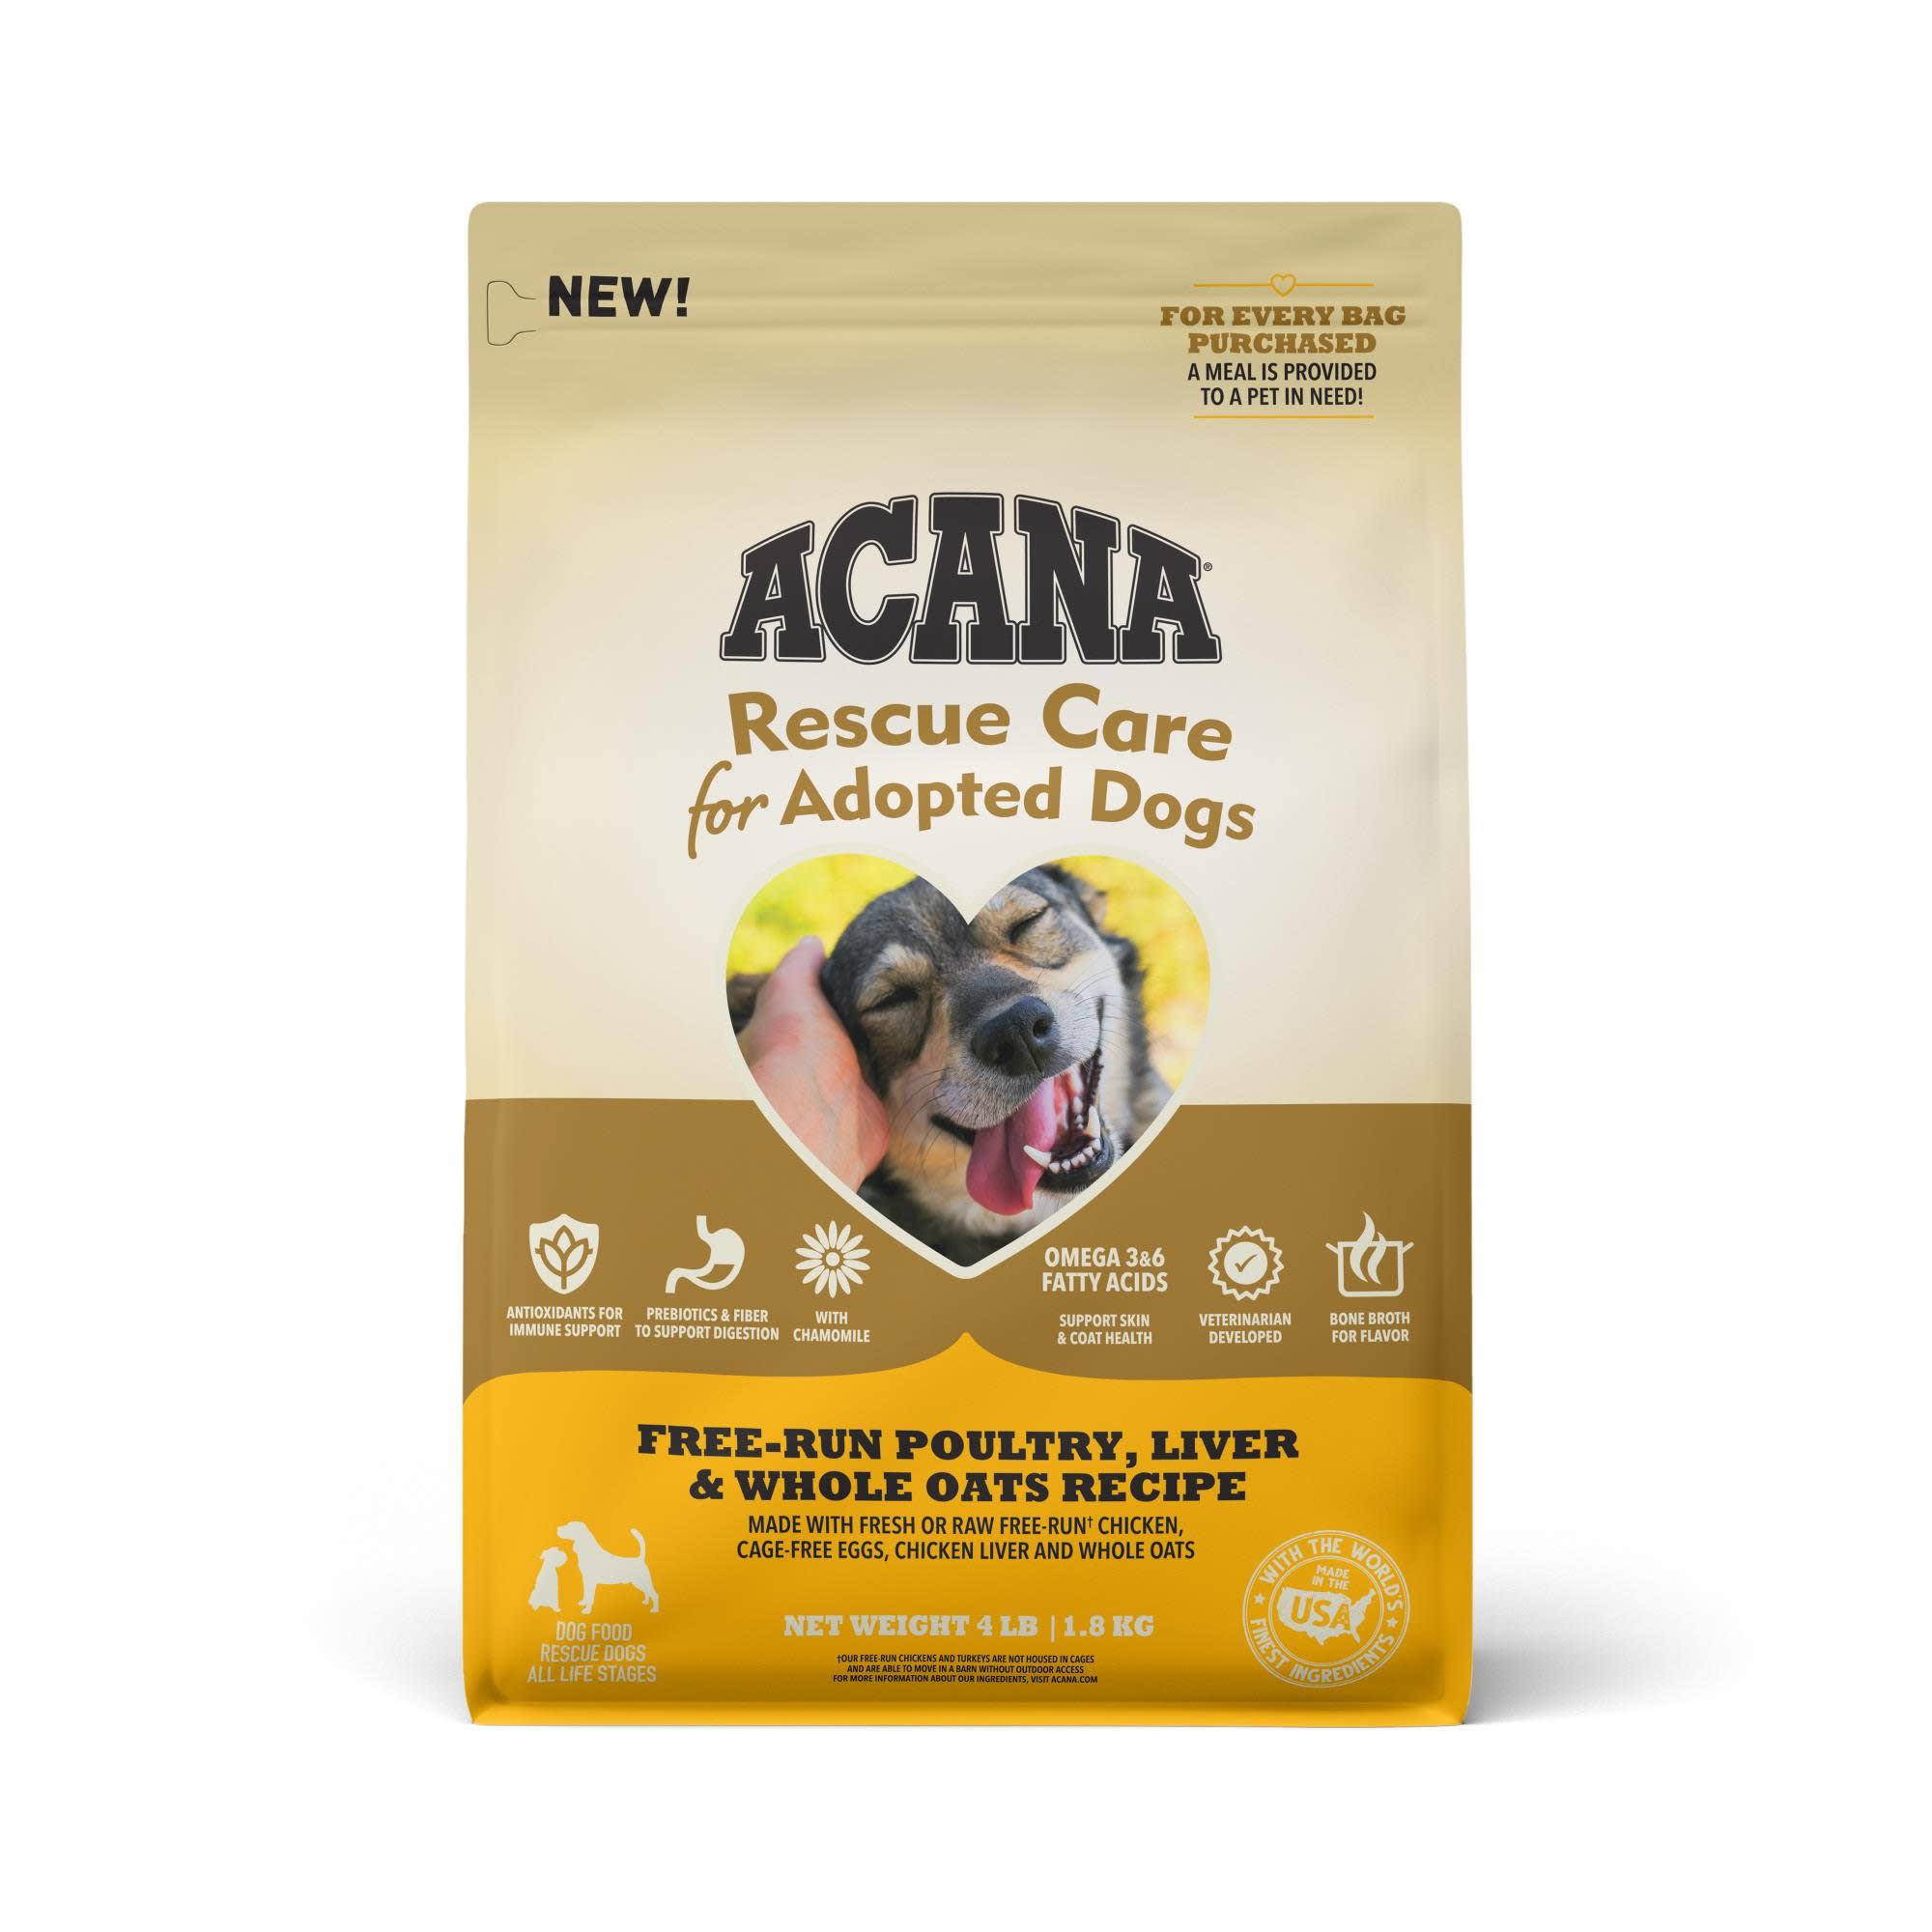 Acana 'Kentucky Dogstar Chicken' Rescue Care for Adopted Dogs Free-Range Poultry & Oats Premium Dog Food - 22.5 lb Bag  